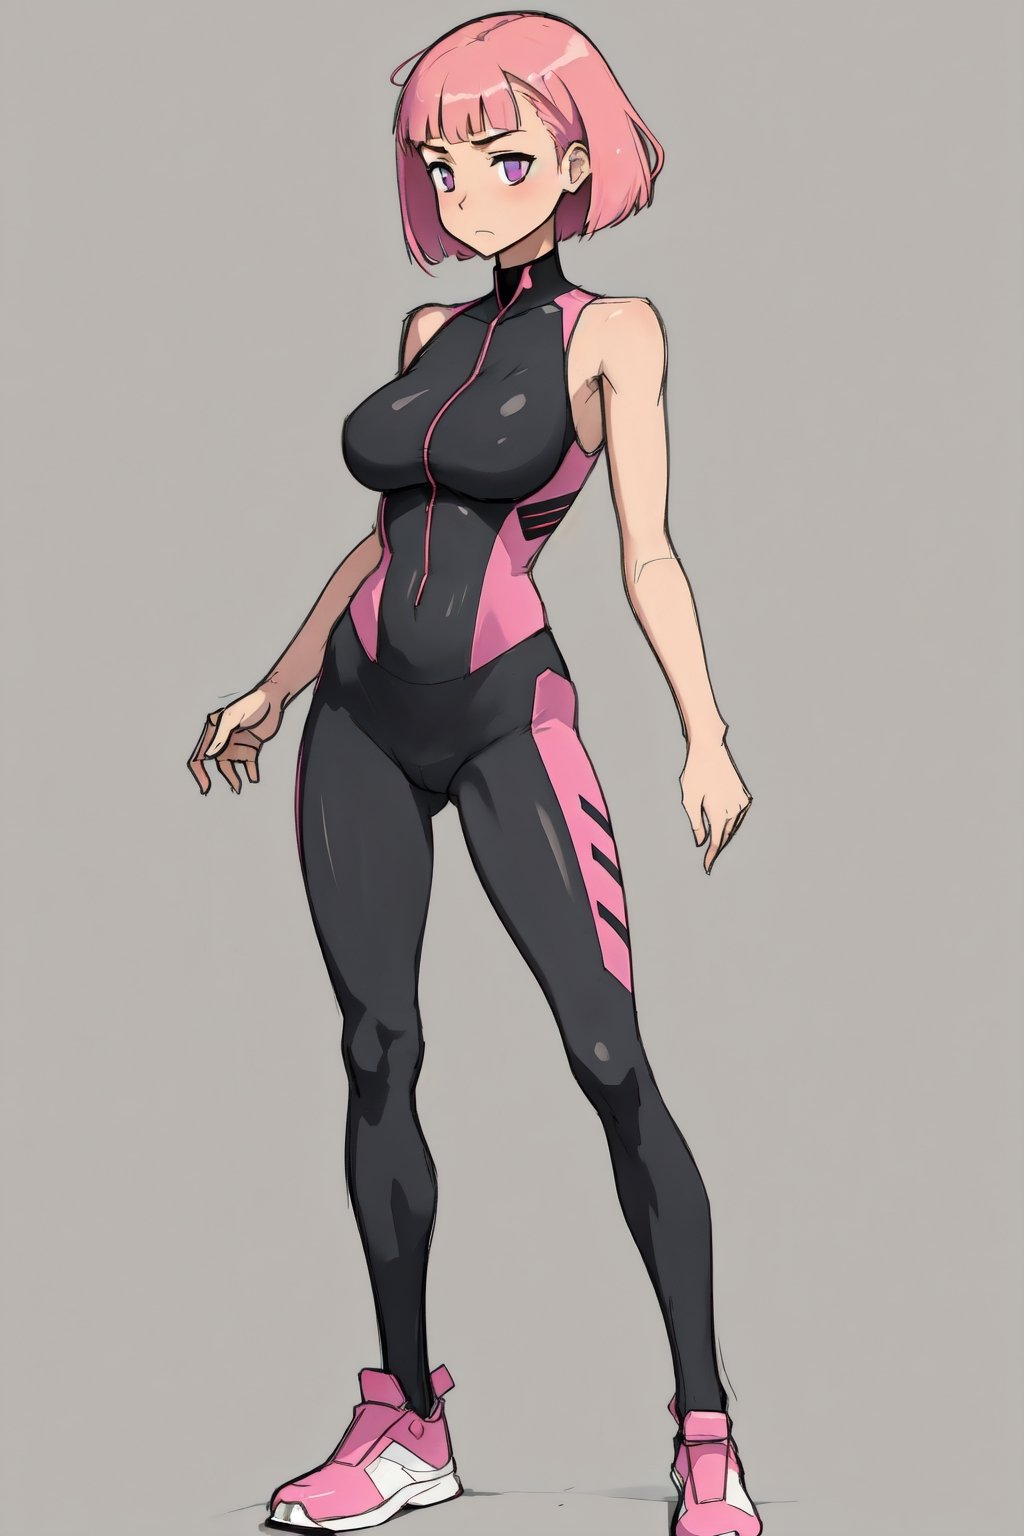 1 girl (best quality), full body, pink hair, short bob hair, astro costume, purple eyes, tight bodysuit, transparent bodysuit, leotard, pose character characteristics, standing pose relaxed arms, neutral standing pose, character characteristics character, full character, futuristic footwear, cyberpunk style, masamune shirow style, neco style, No background, light background, white background, plain white background, no background, clean background, jumpsuit,th1nsh1rtng,leggings,SAM YANG